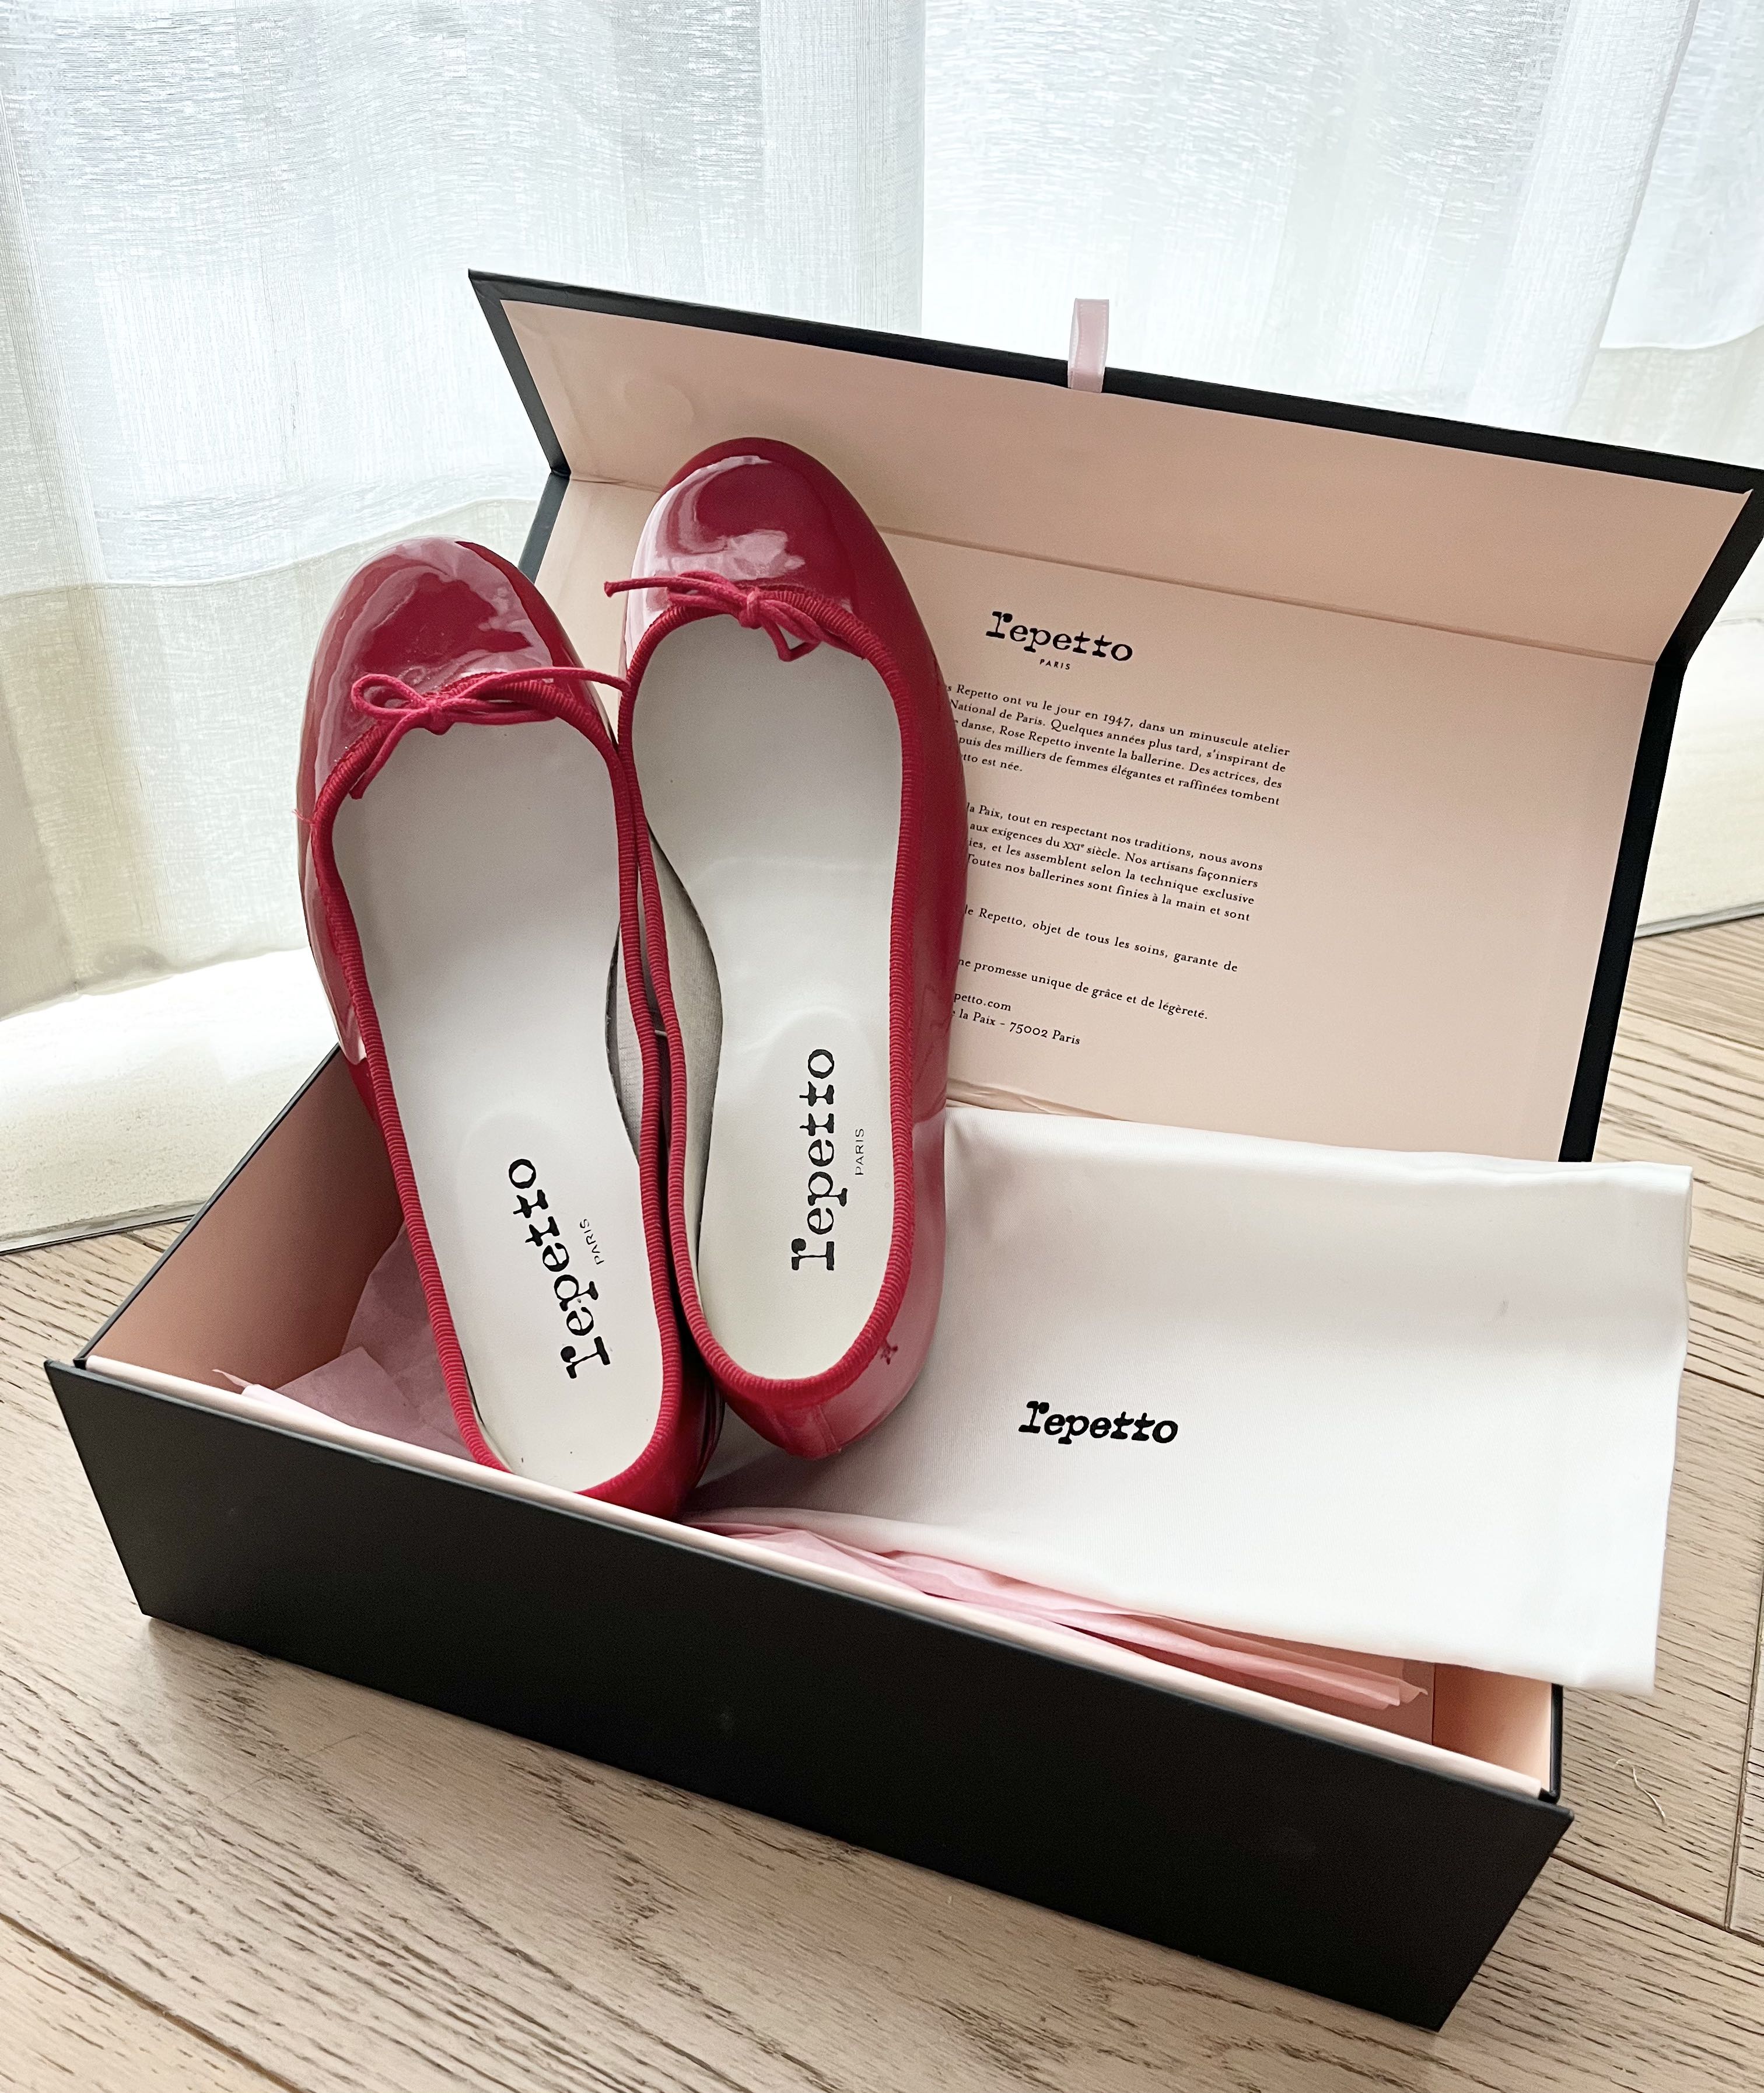 Repetto Camille ballerinas - red heels, 女裝, 鞋, 高跟鞋- Carousell